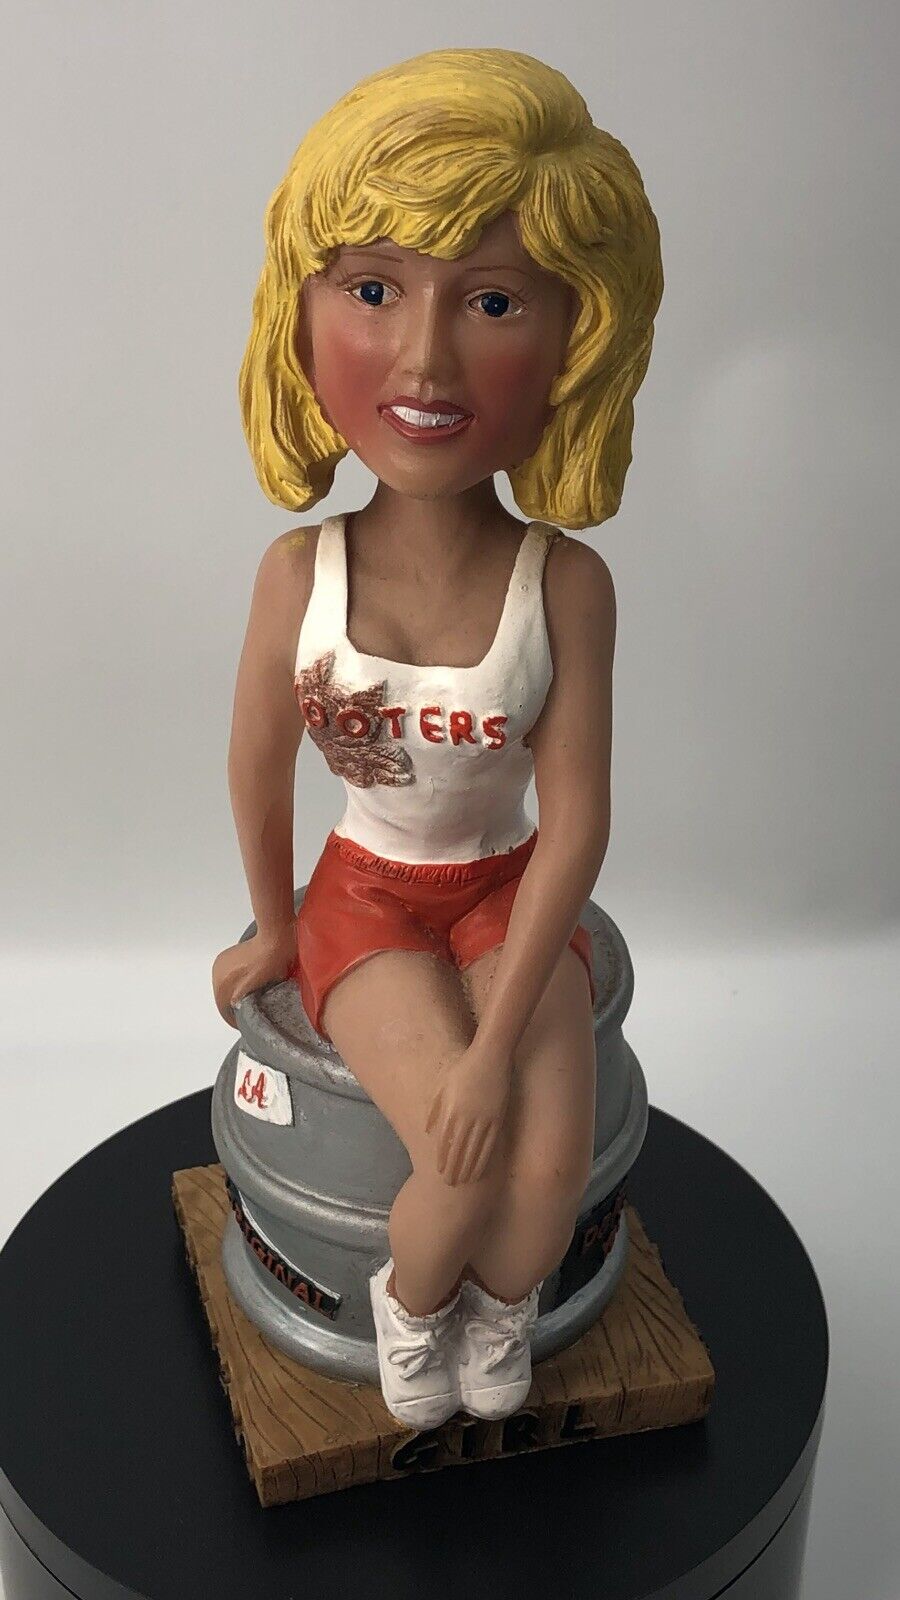 Hooters Girl Bobblehead Delightfully Tacky Yet Unrefined Unique Rare Collectible